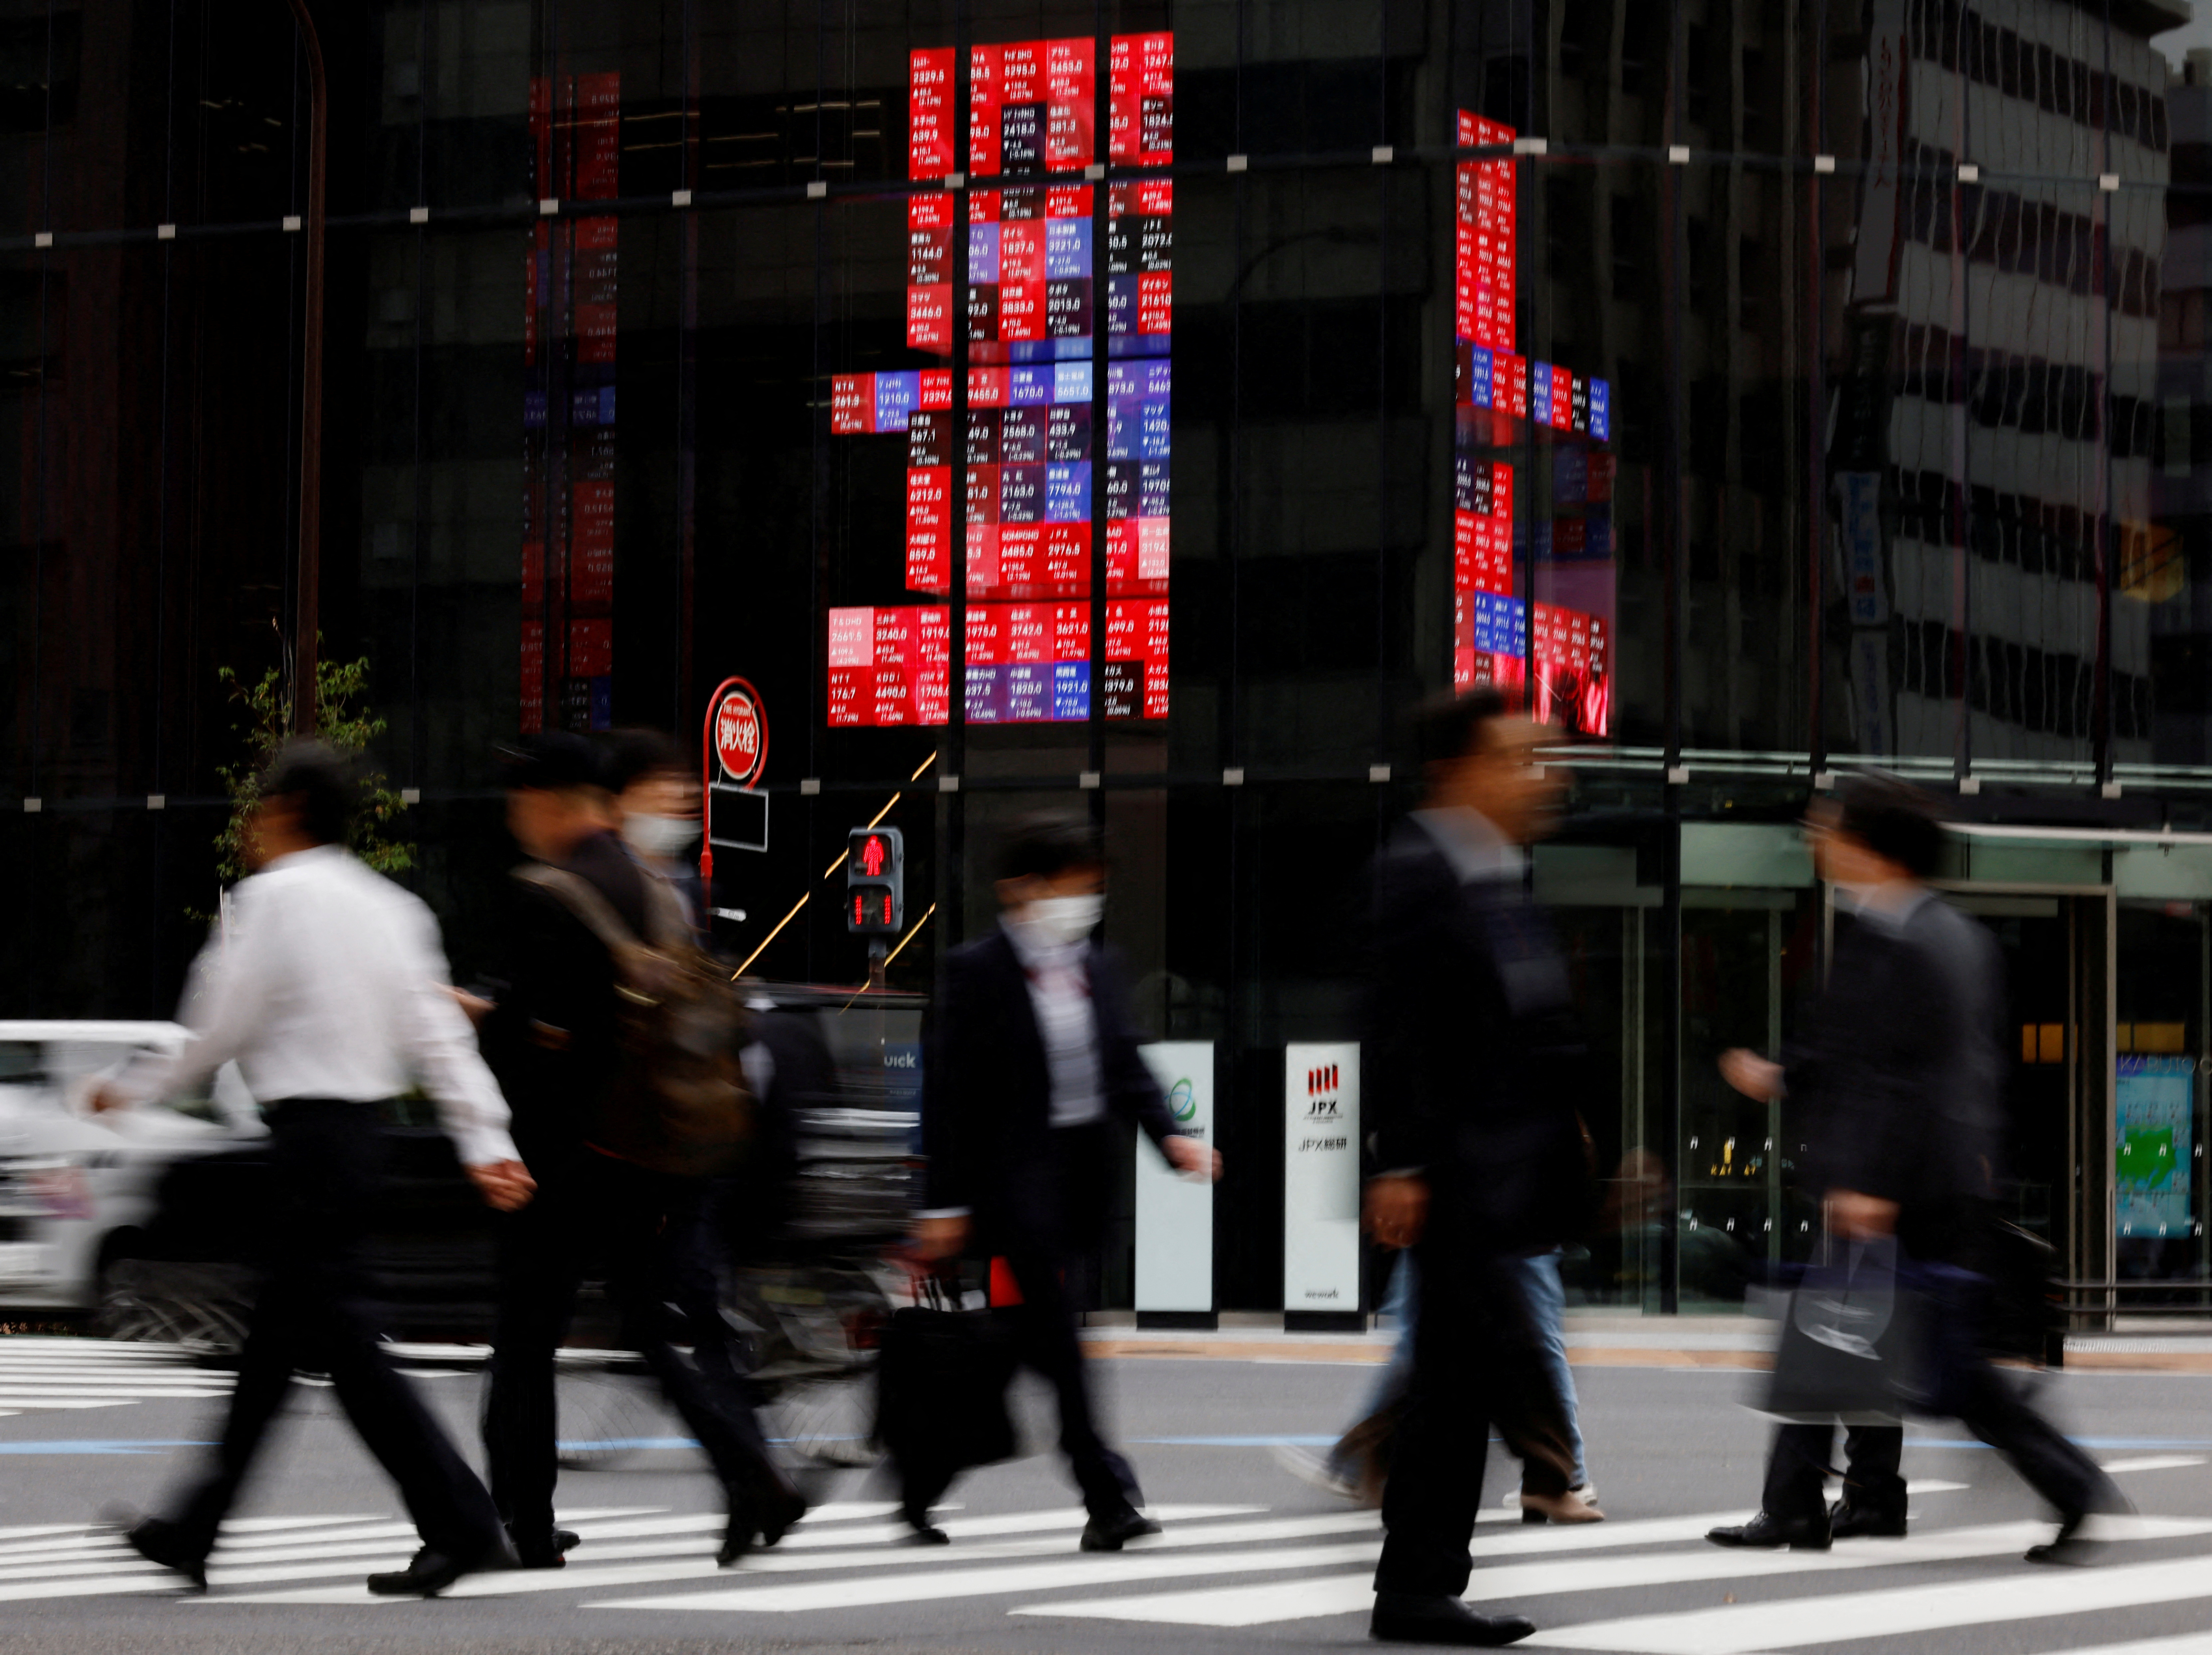 Pedestrians walk past an electronic board displaying various companies' share prices, at a business district in Tokyo